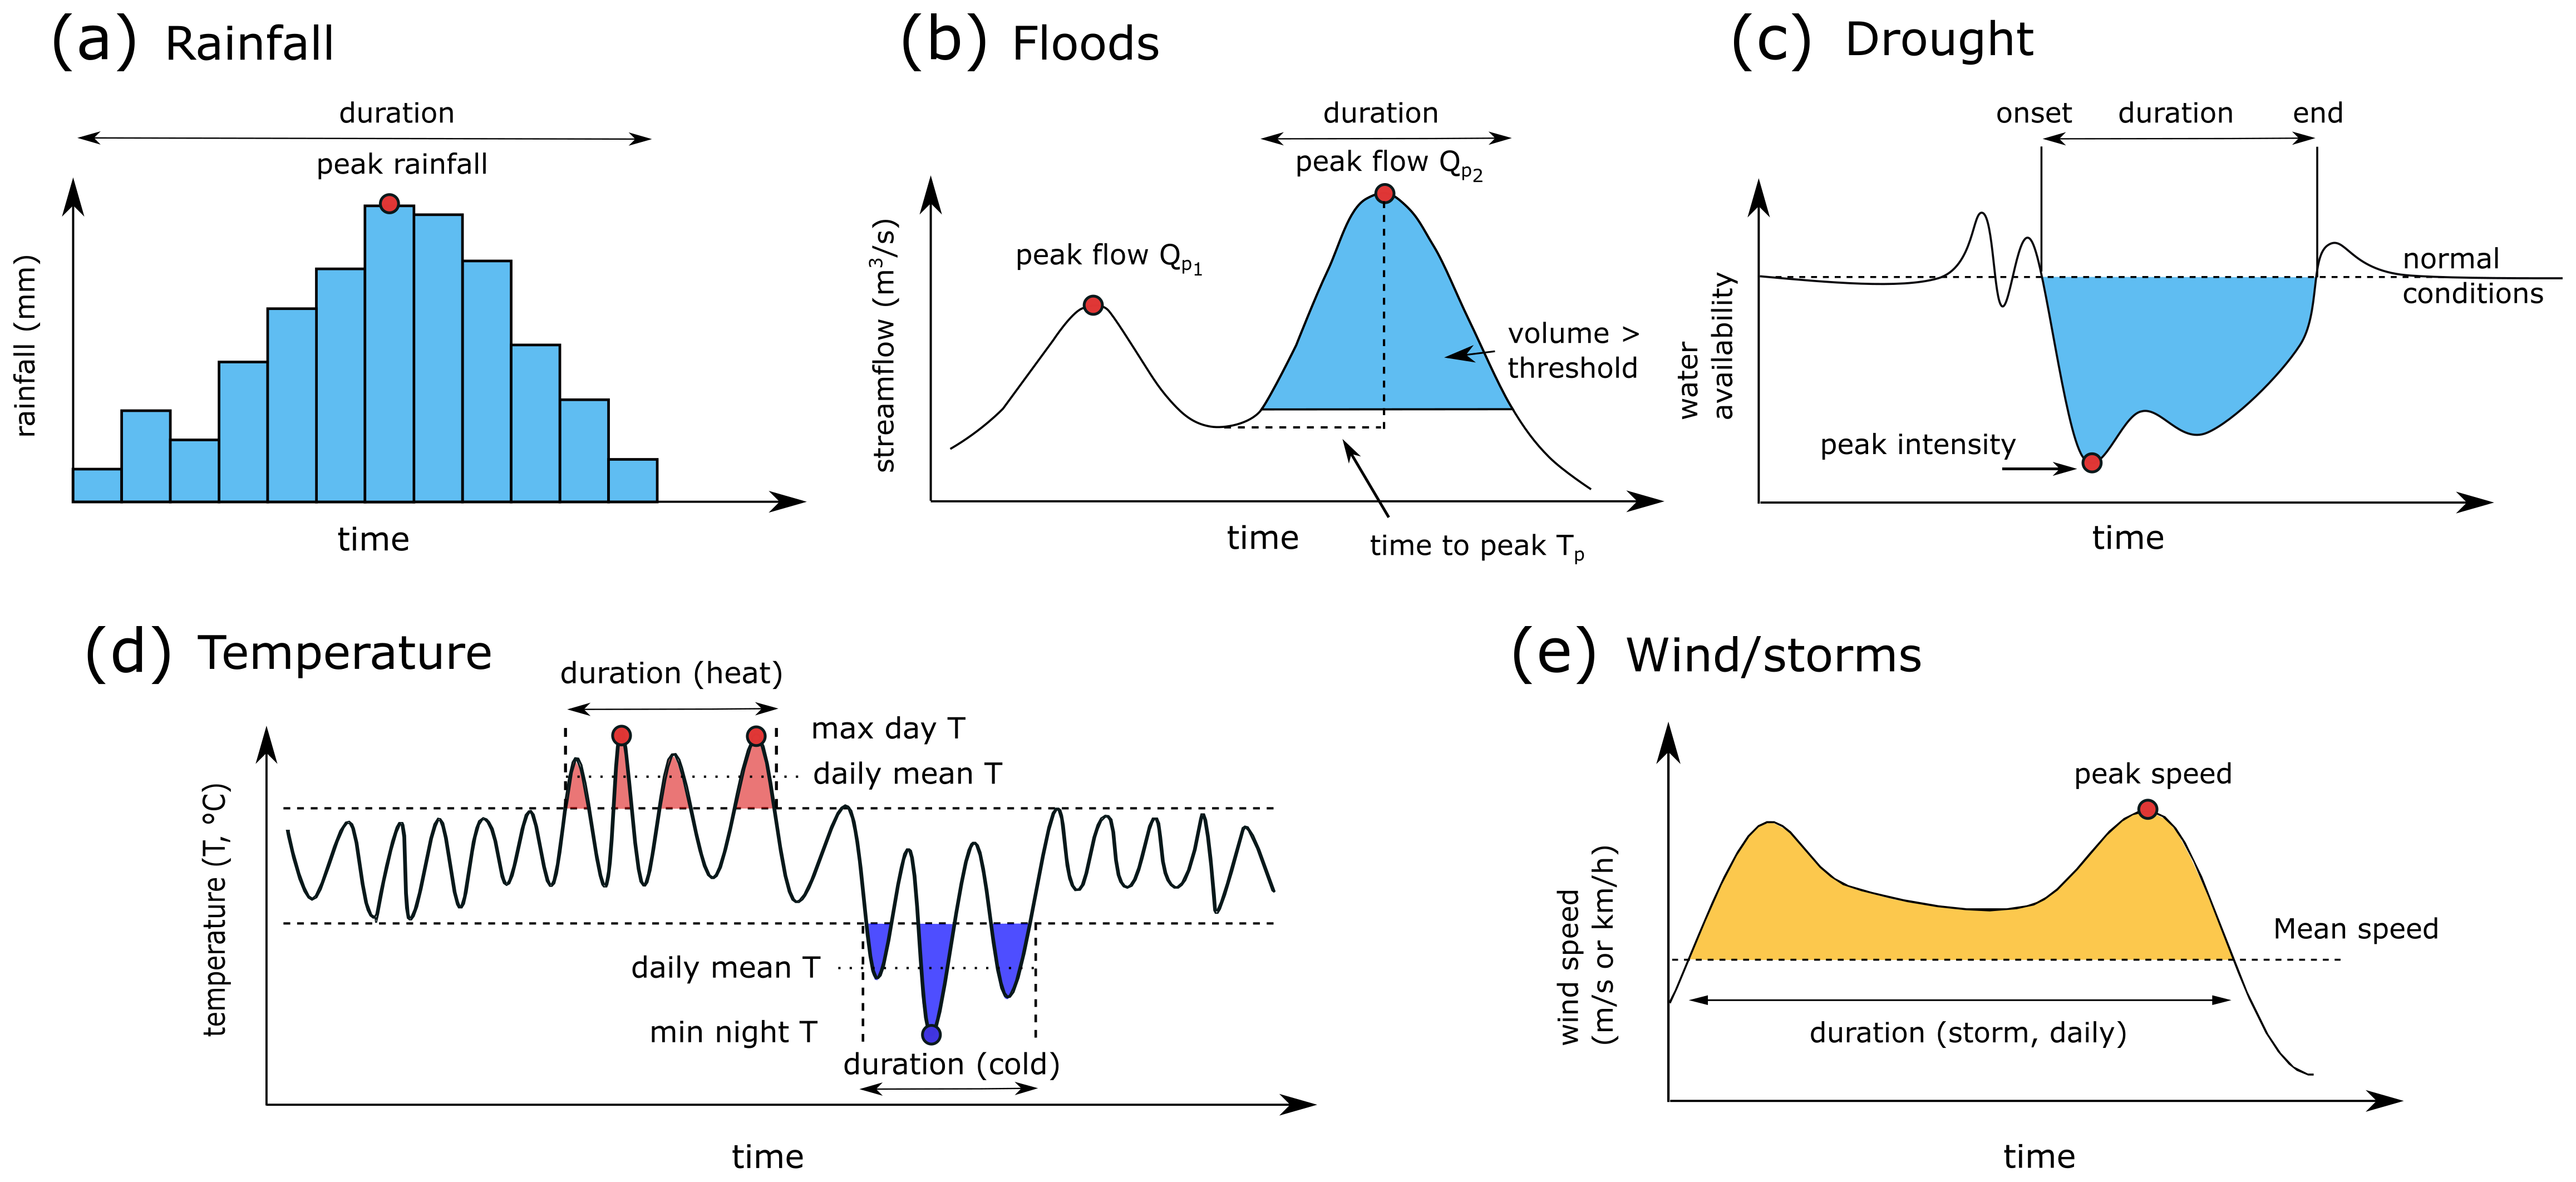 Hess Nonstationary Weather And Water Extremes A Review Of Methods For Their Detection Attribution And Management